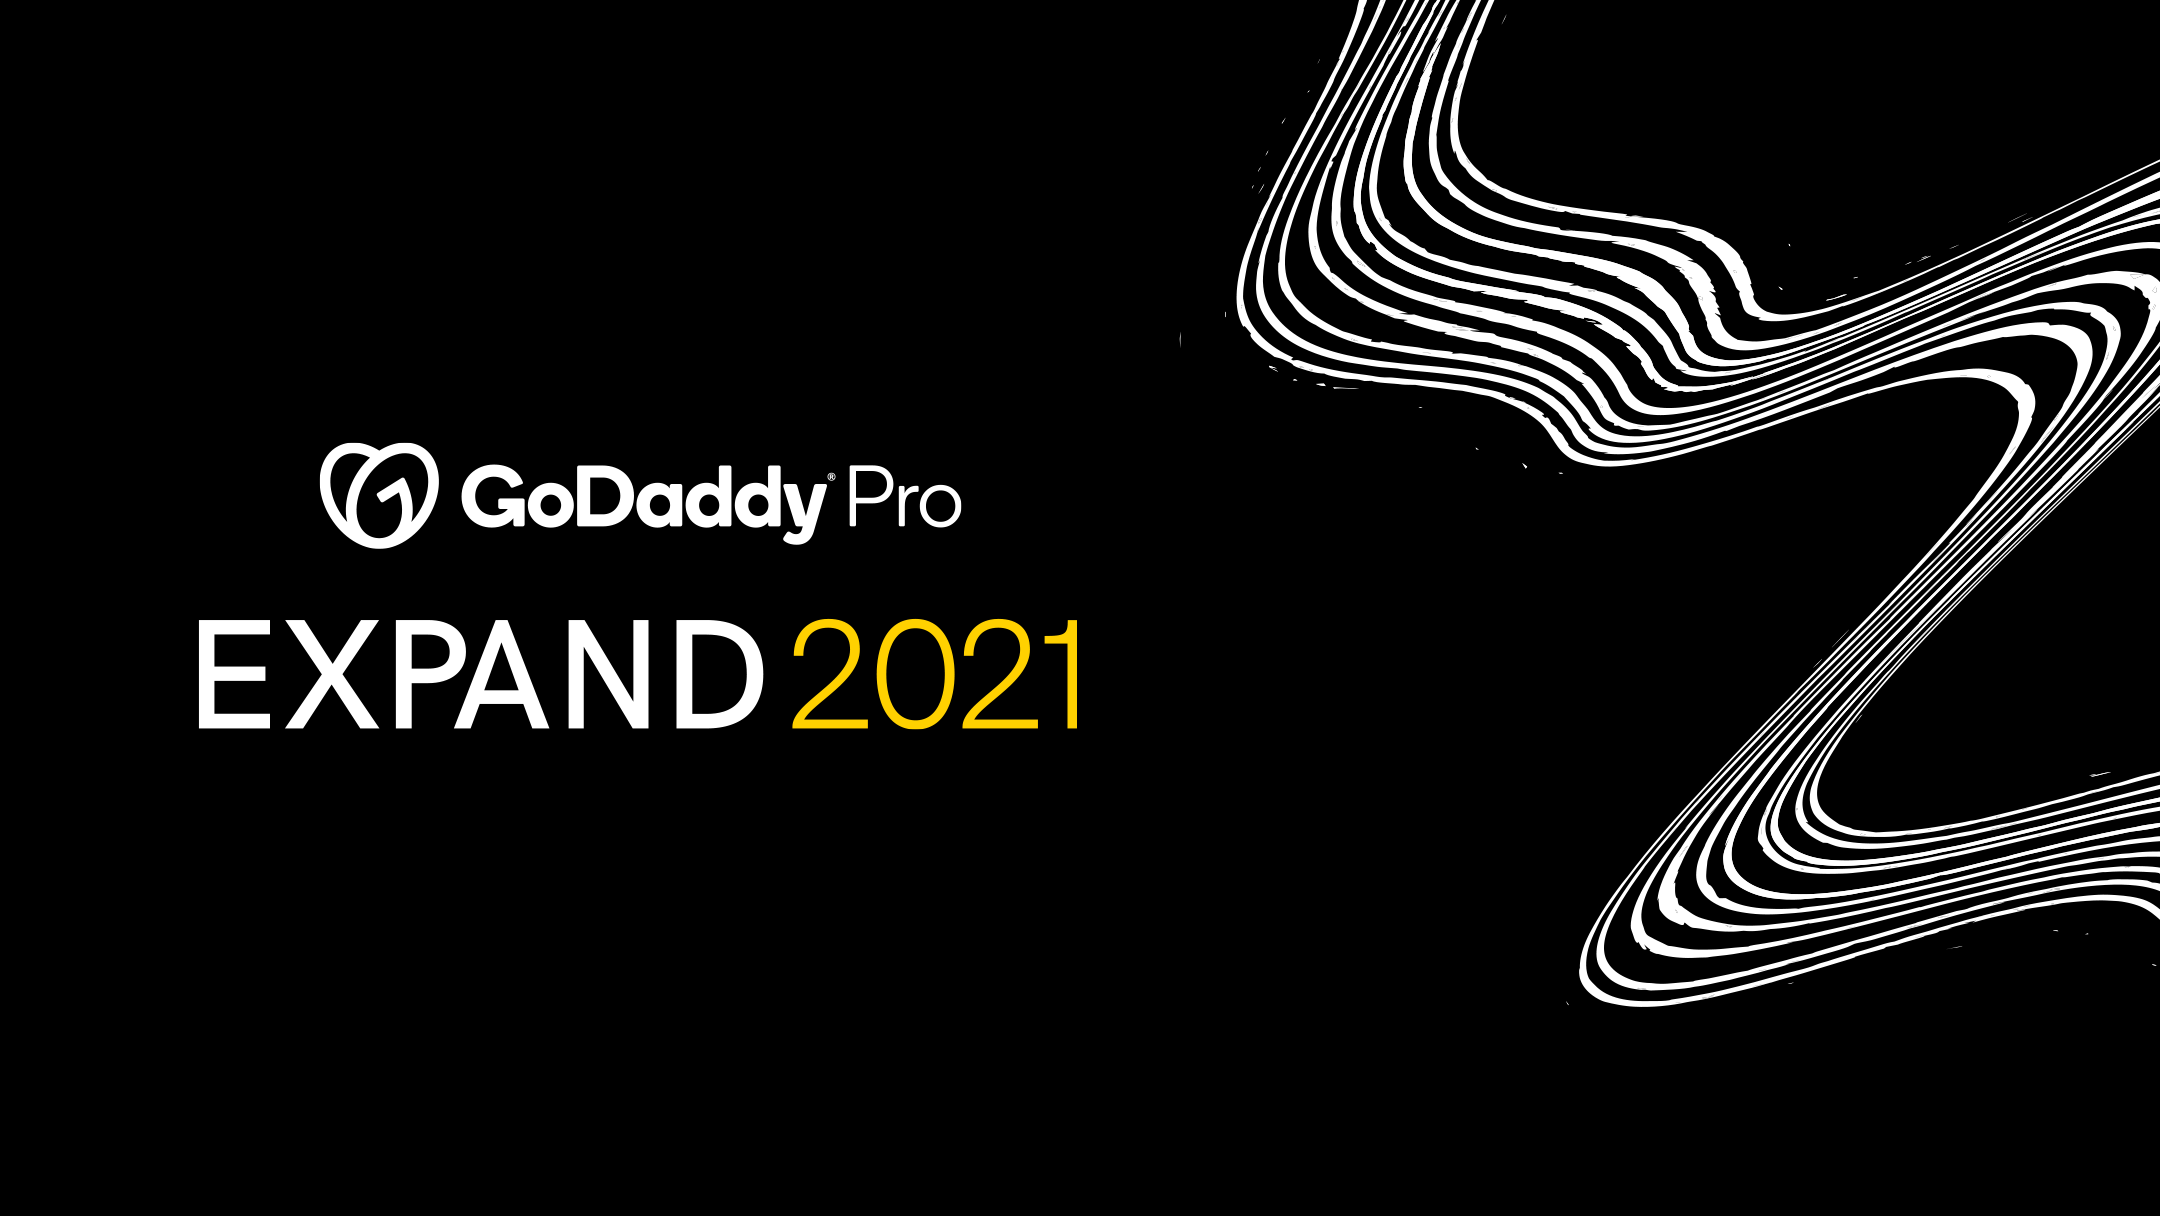 GoDaddy Pro To Host Second EXPAND 2021 Event on September 24 in India